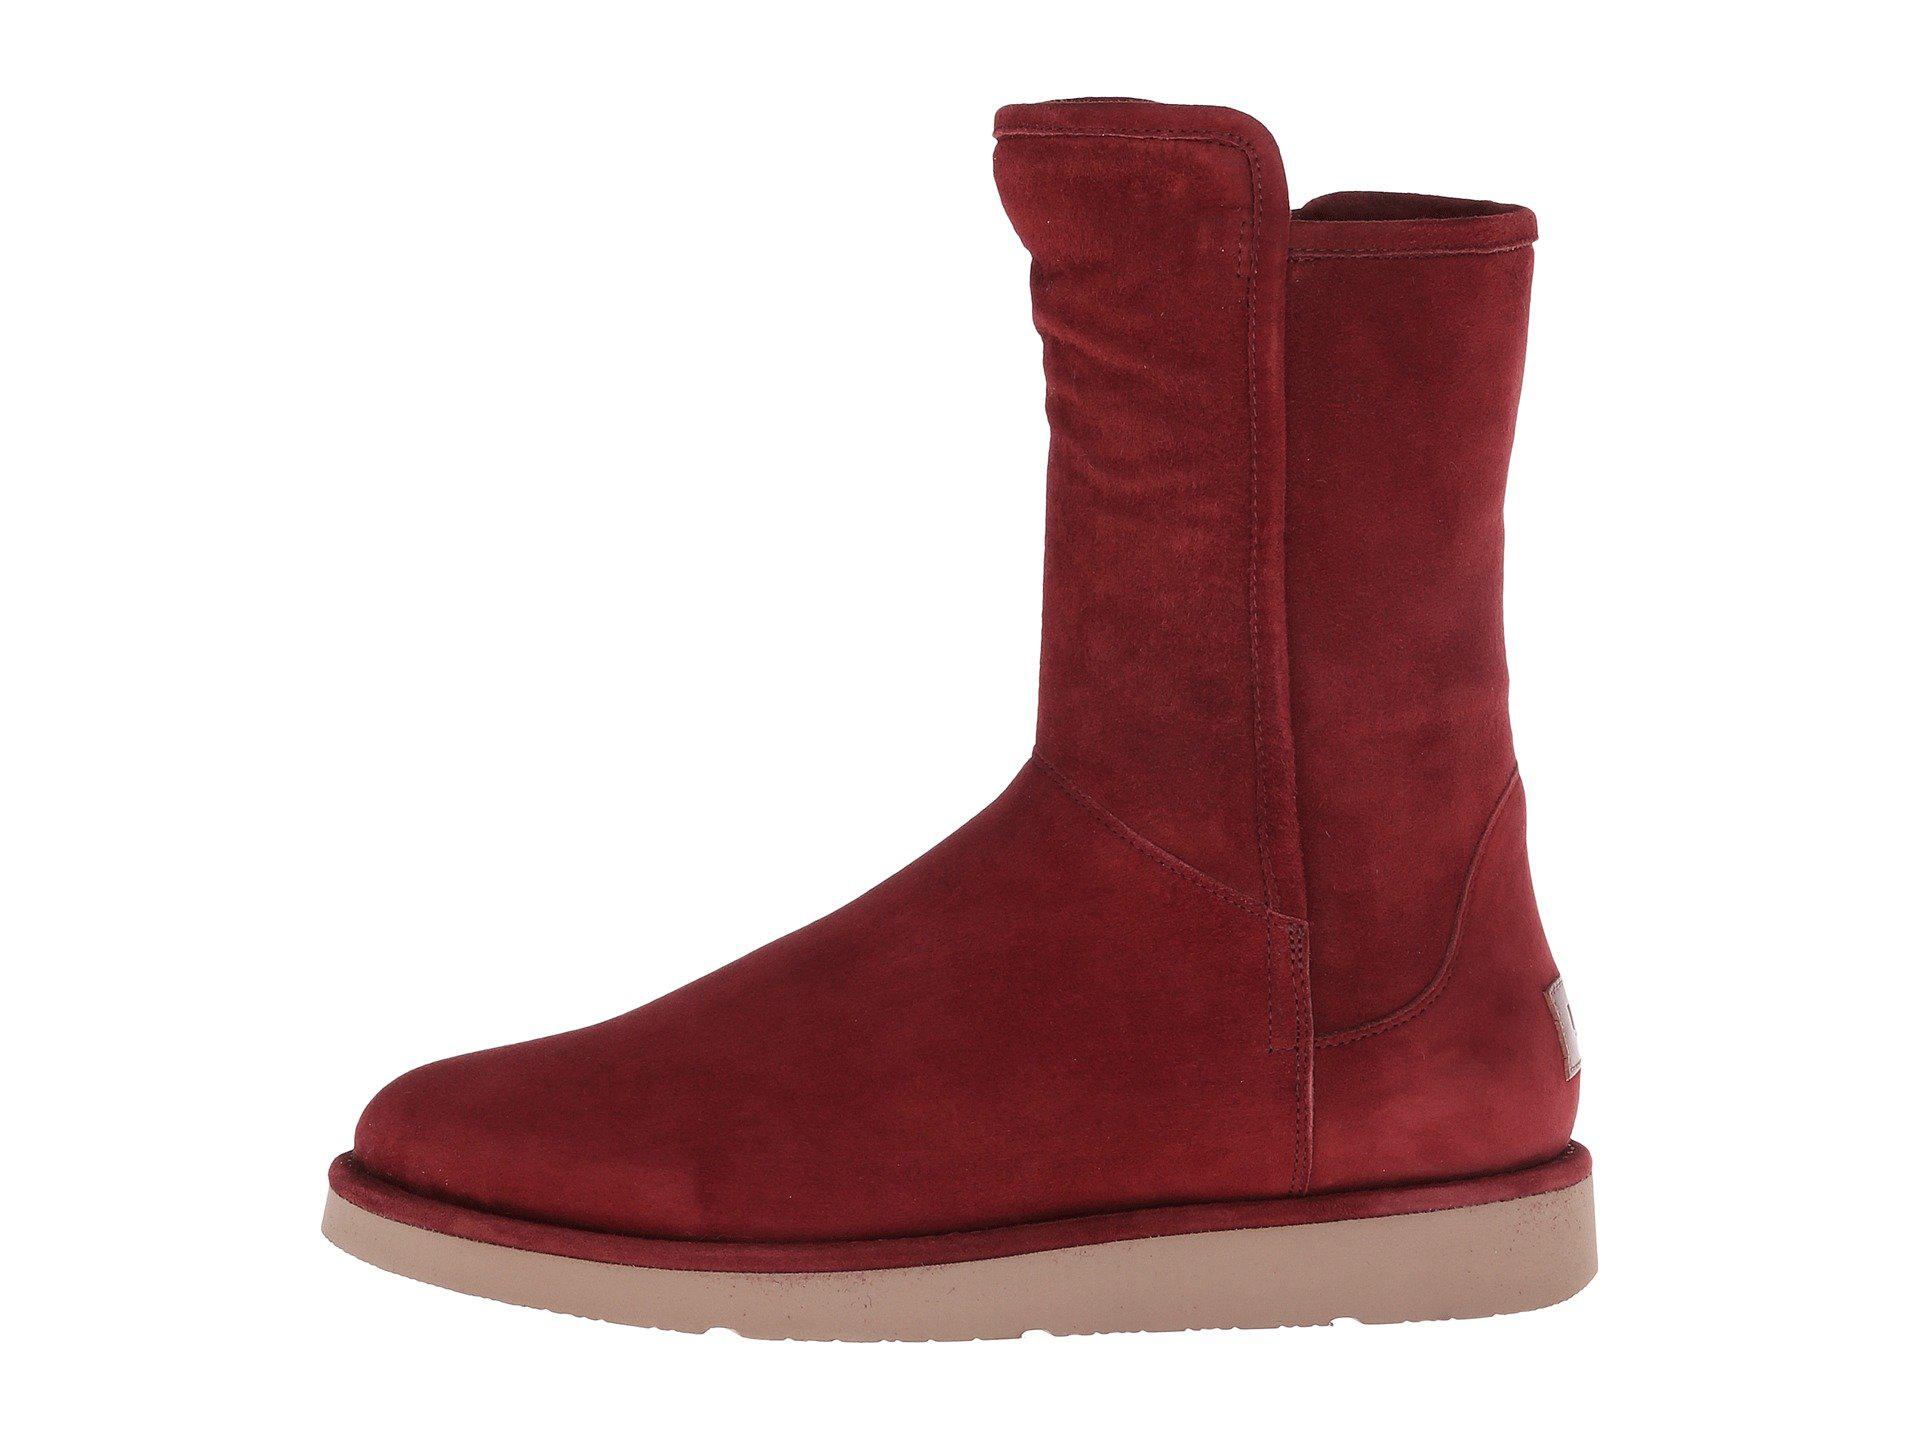 UGG Leather Abree Short (nero) Women's Boots in Rust (Red) - Lyst